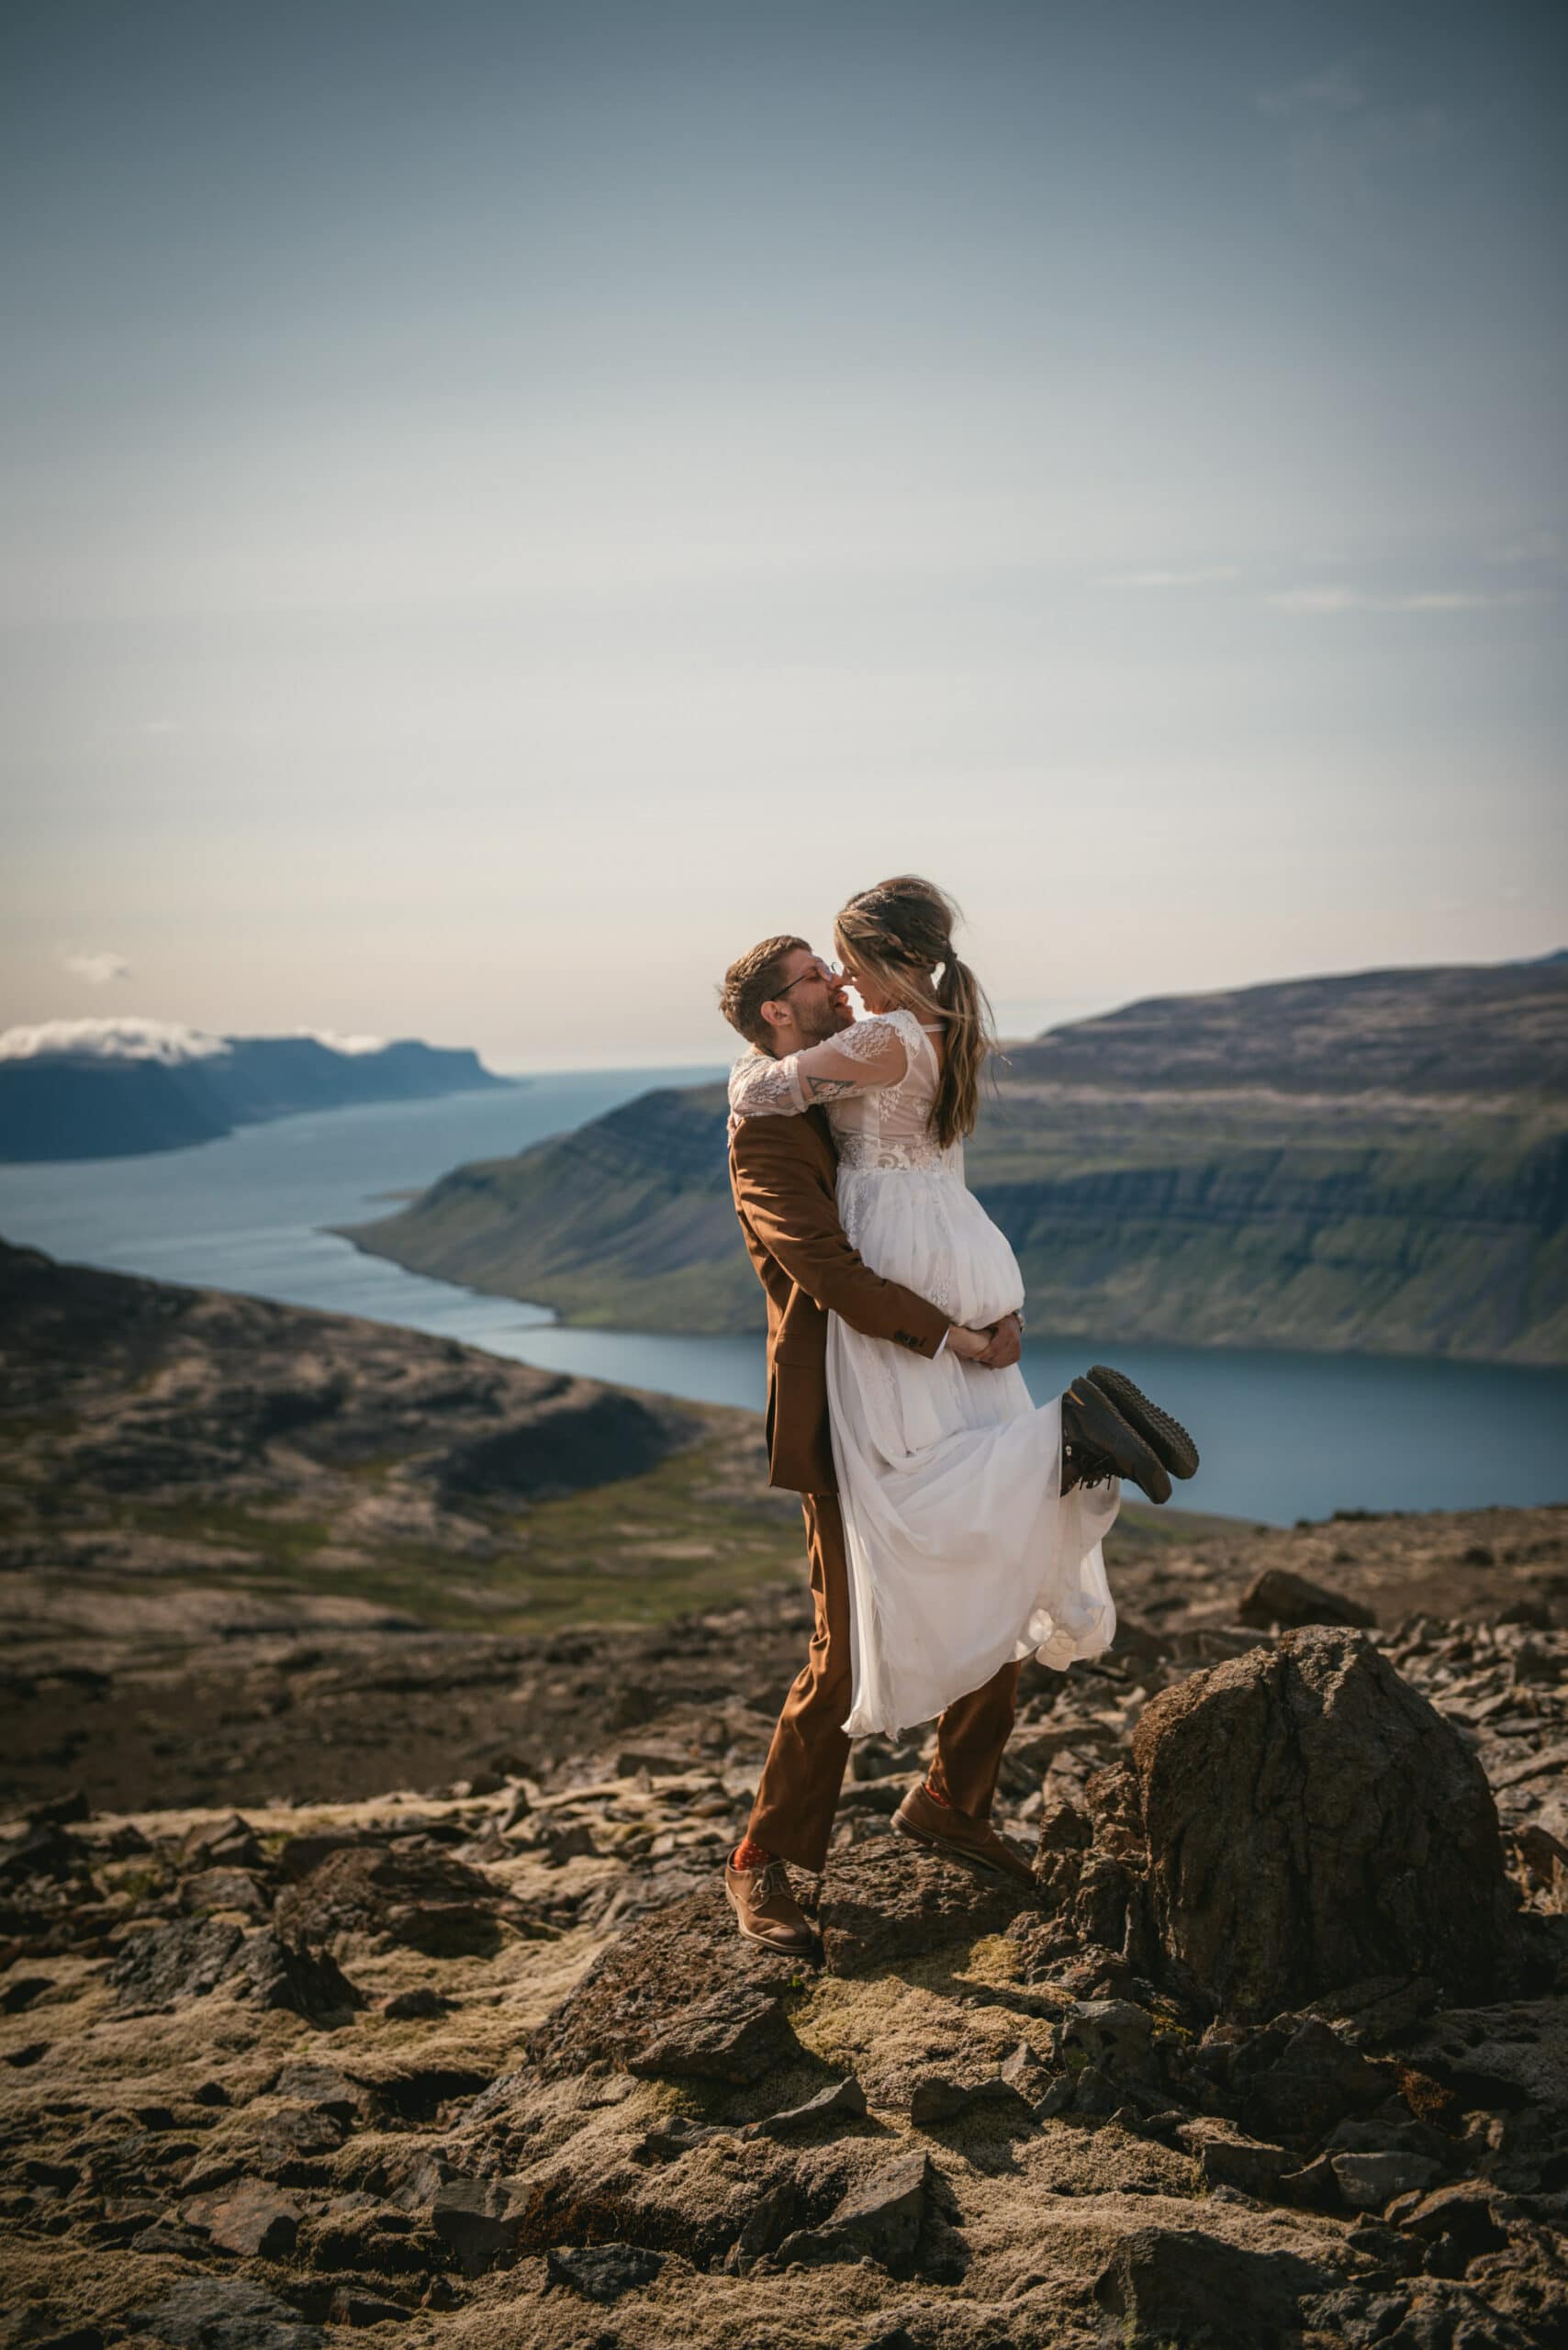 Loving embrace against a backdrop of rugged mountains and picturesque fjords.